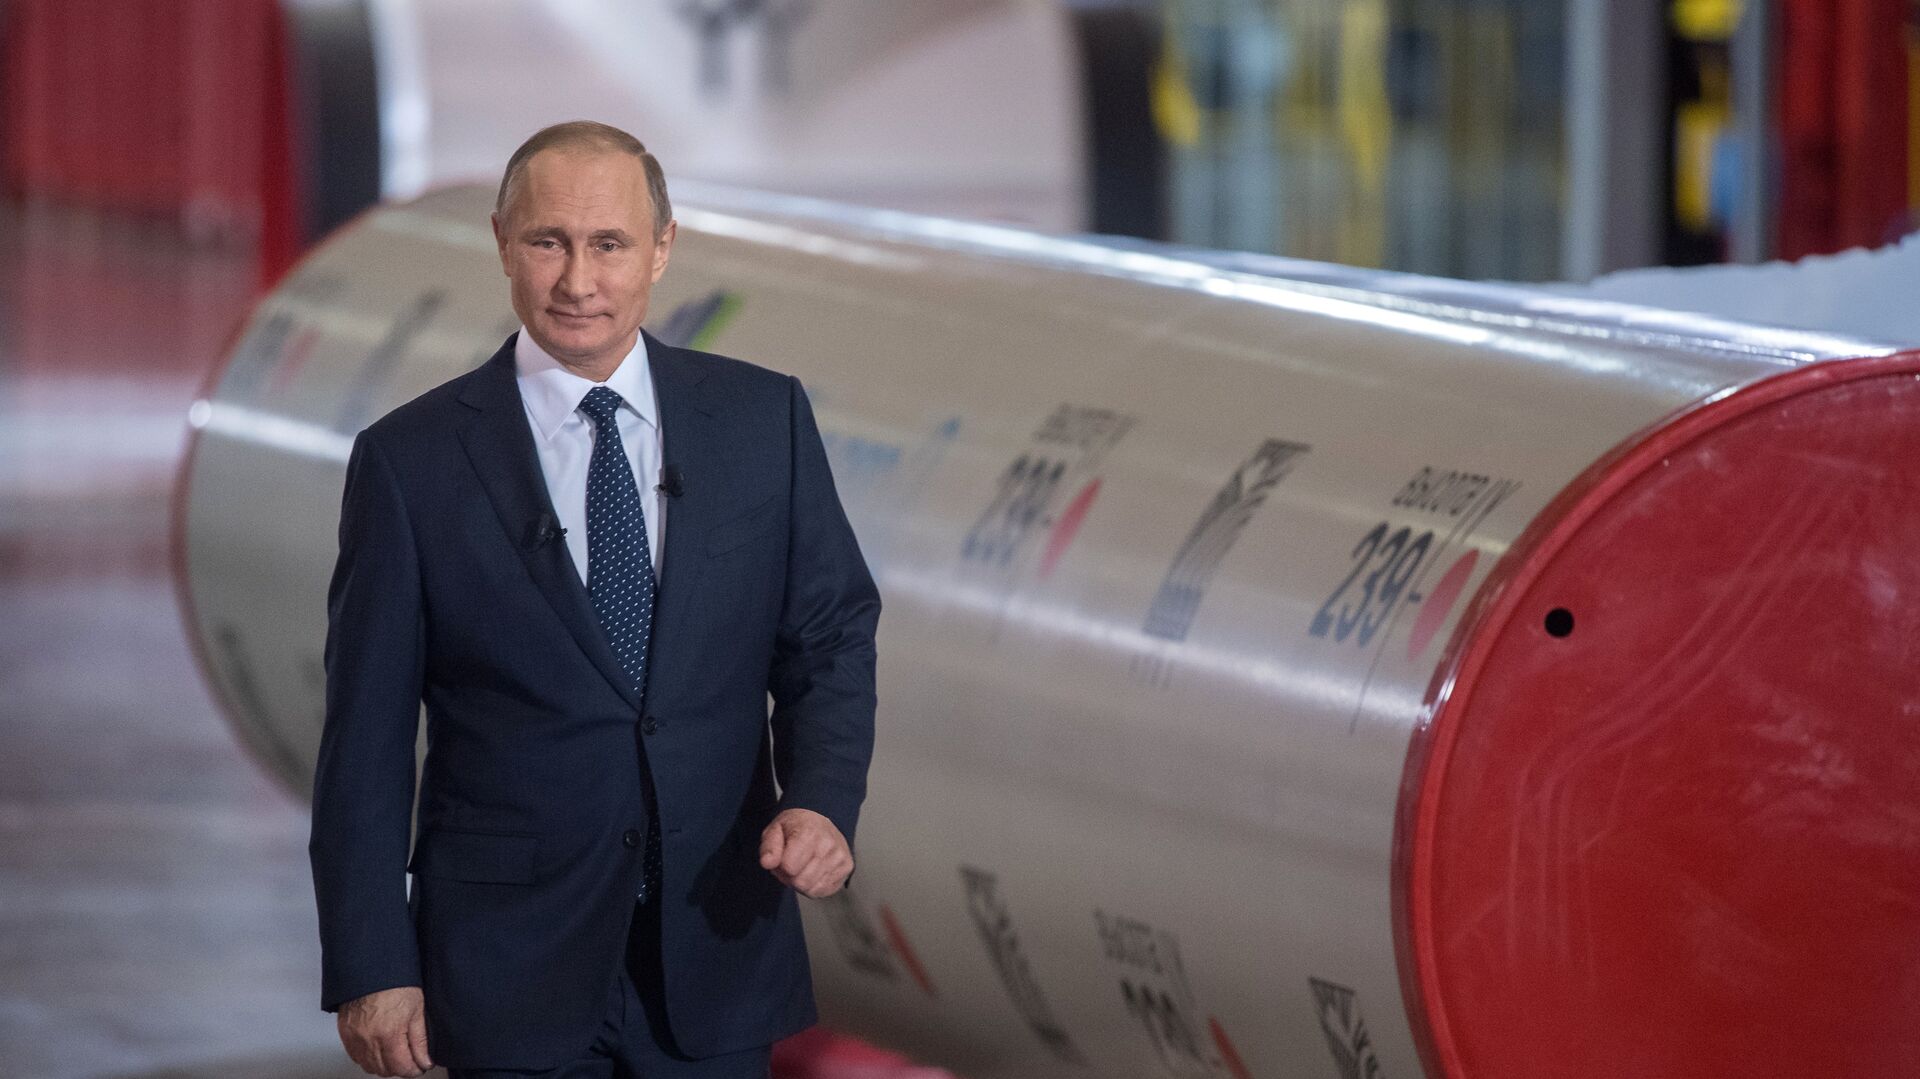 Russian President Vladimir Putin poses before section of pipeline for the Nord Stream 2 project, which Germany unilaterally froze in February after Russia recognized the Donbass republics as independent states. - Sputnik International, 1920, 19.06.2022